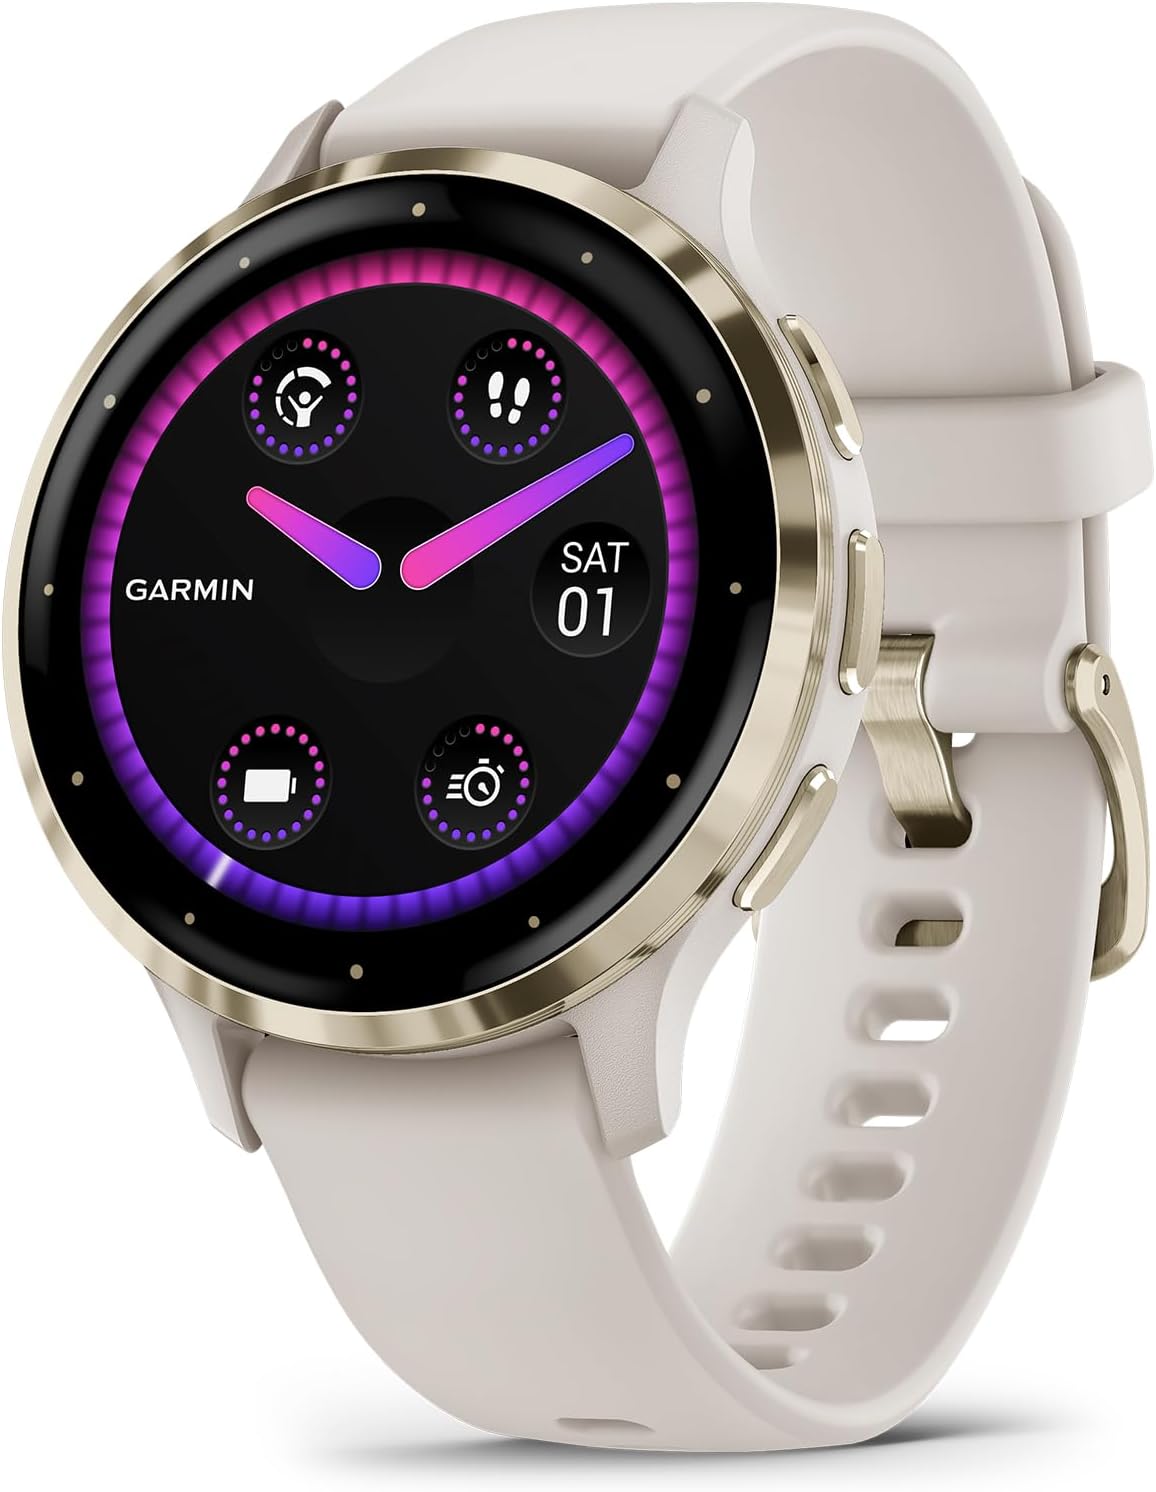 Garmin Venu 3S, GPS Smartwatch, AMOLED Display, Advanced Health and Fitness Features, Up to 10 Days of Battery, Dust Rose